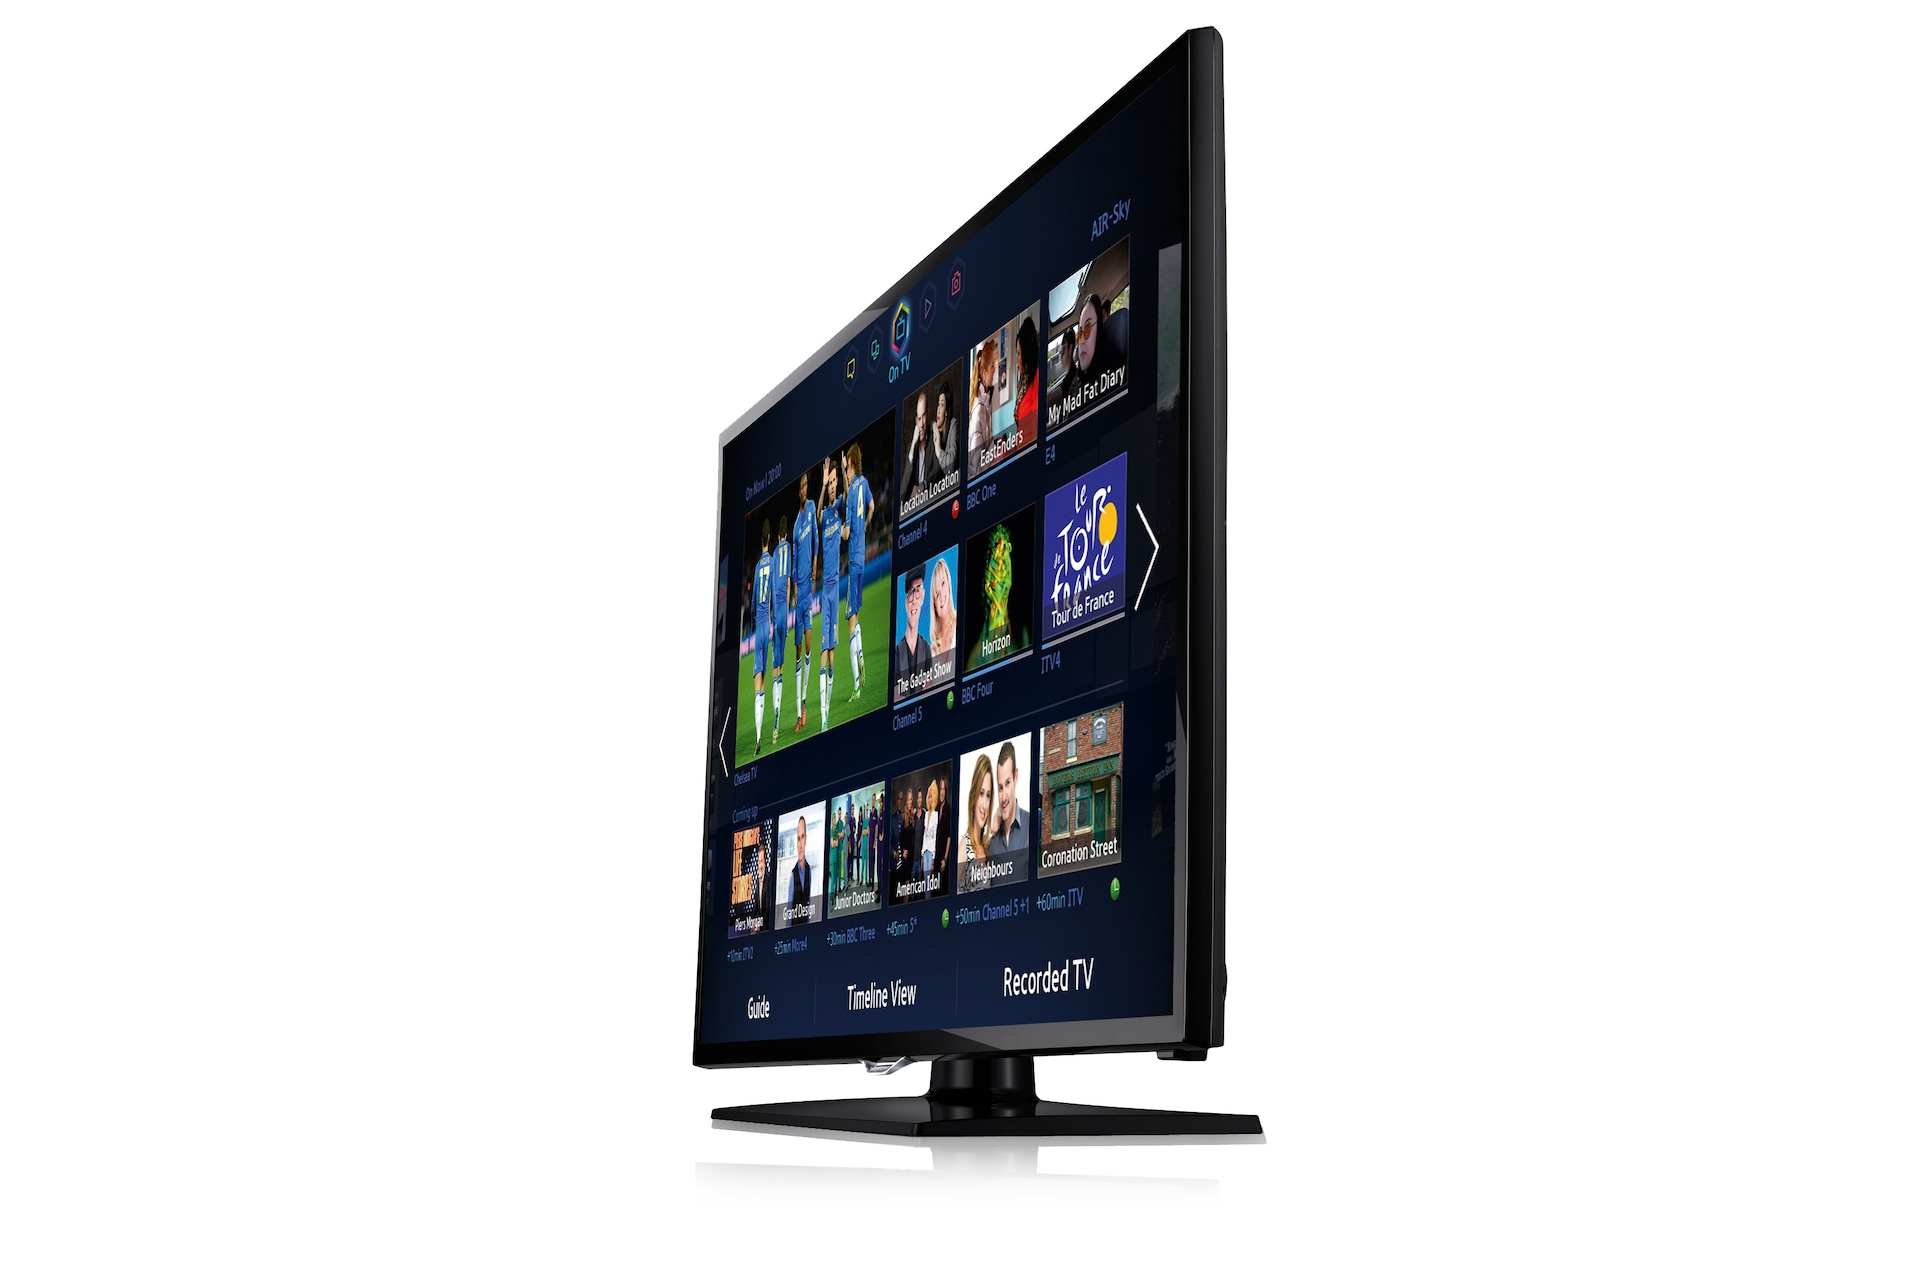 Samsung Televisions – SUHD, UHD, LED & Curved TVs3000 x 2000